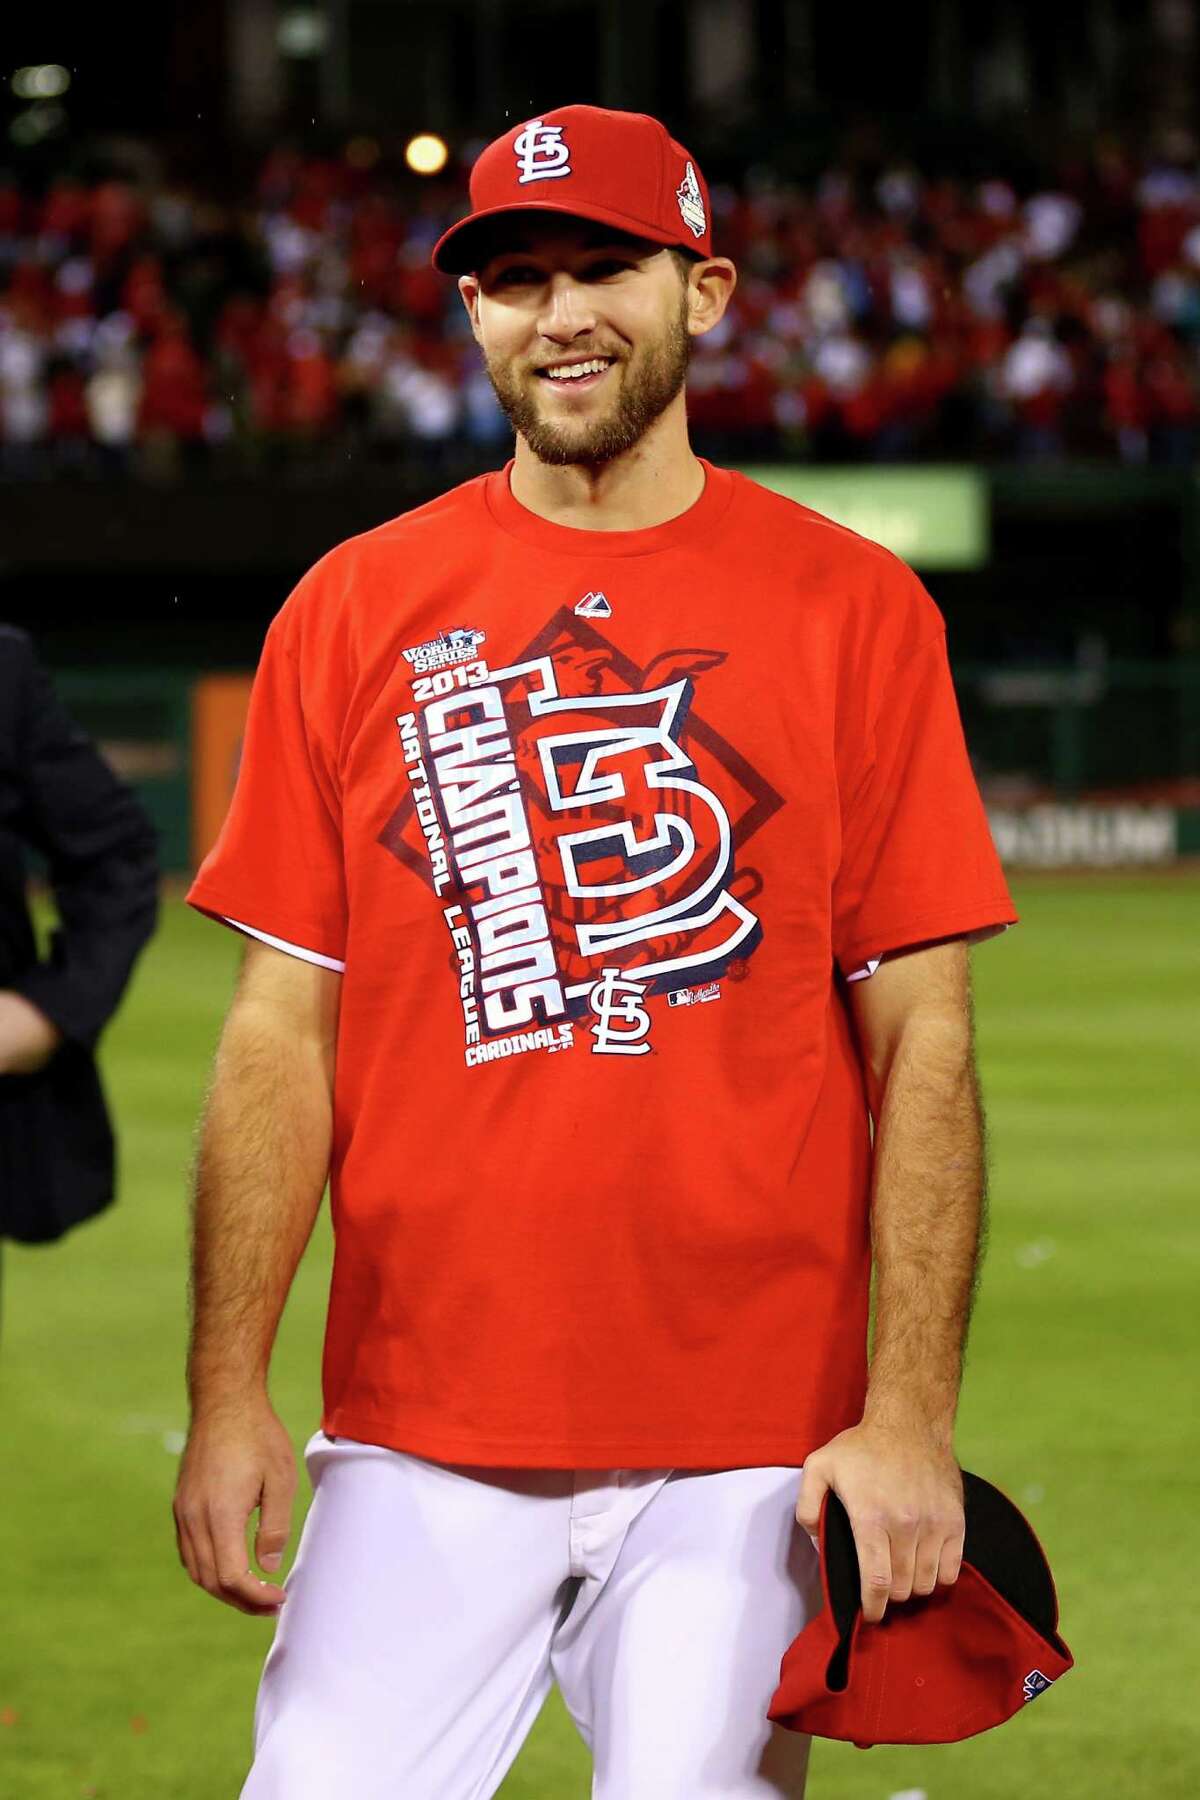 ST LOUIS, MO - OCTOBER 18: Michael Wacha #52 of the St. Louis Cardinals celebrates after the Cardinals defeat the Los Angeles Dodgers 9-0 in Game Six of the National League Championship Series at Busch Stadium on October 18, 2013 in St Louis, Missouri. (Photo by Elsa/Getty Images)